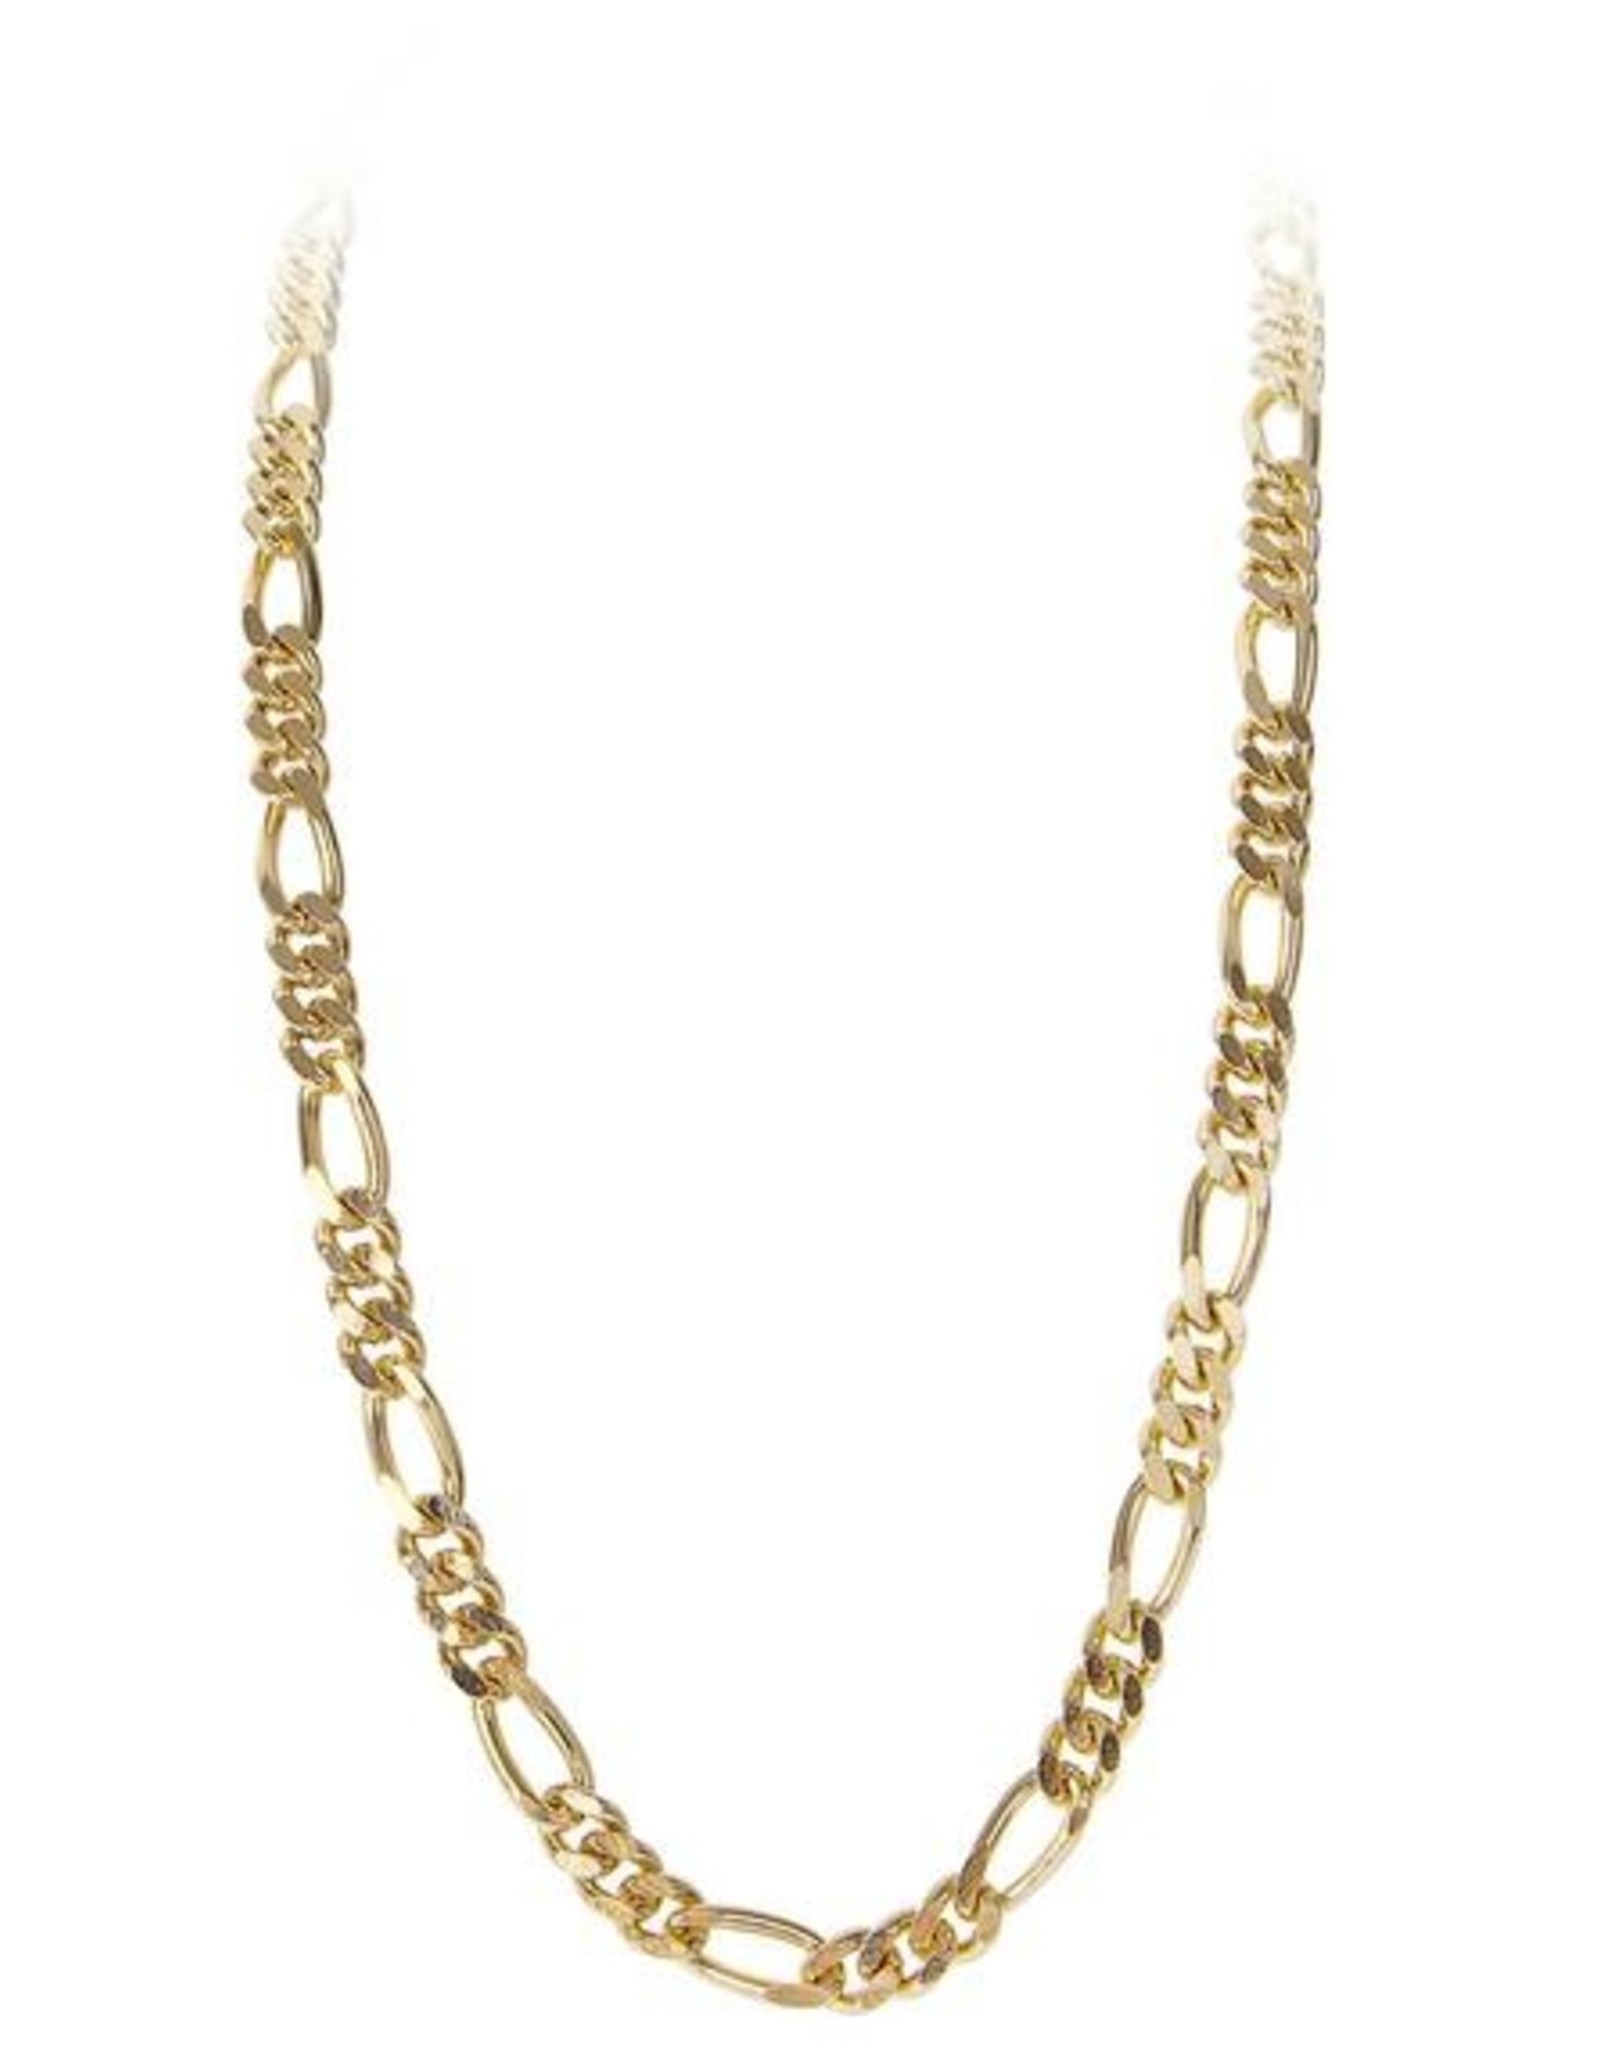 Men's 14k Solid Yellow Gold Figaro 4.7mm Chain Necklace - gold chain, figaro  chains, real gold